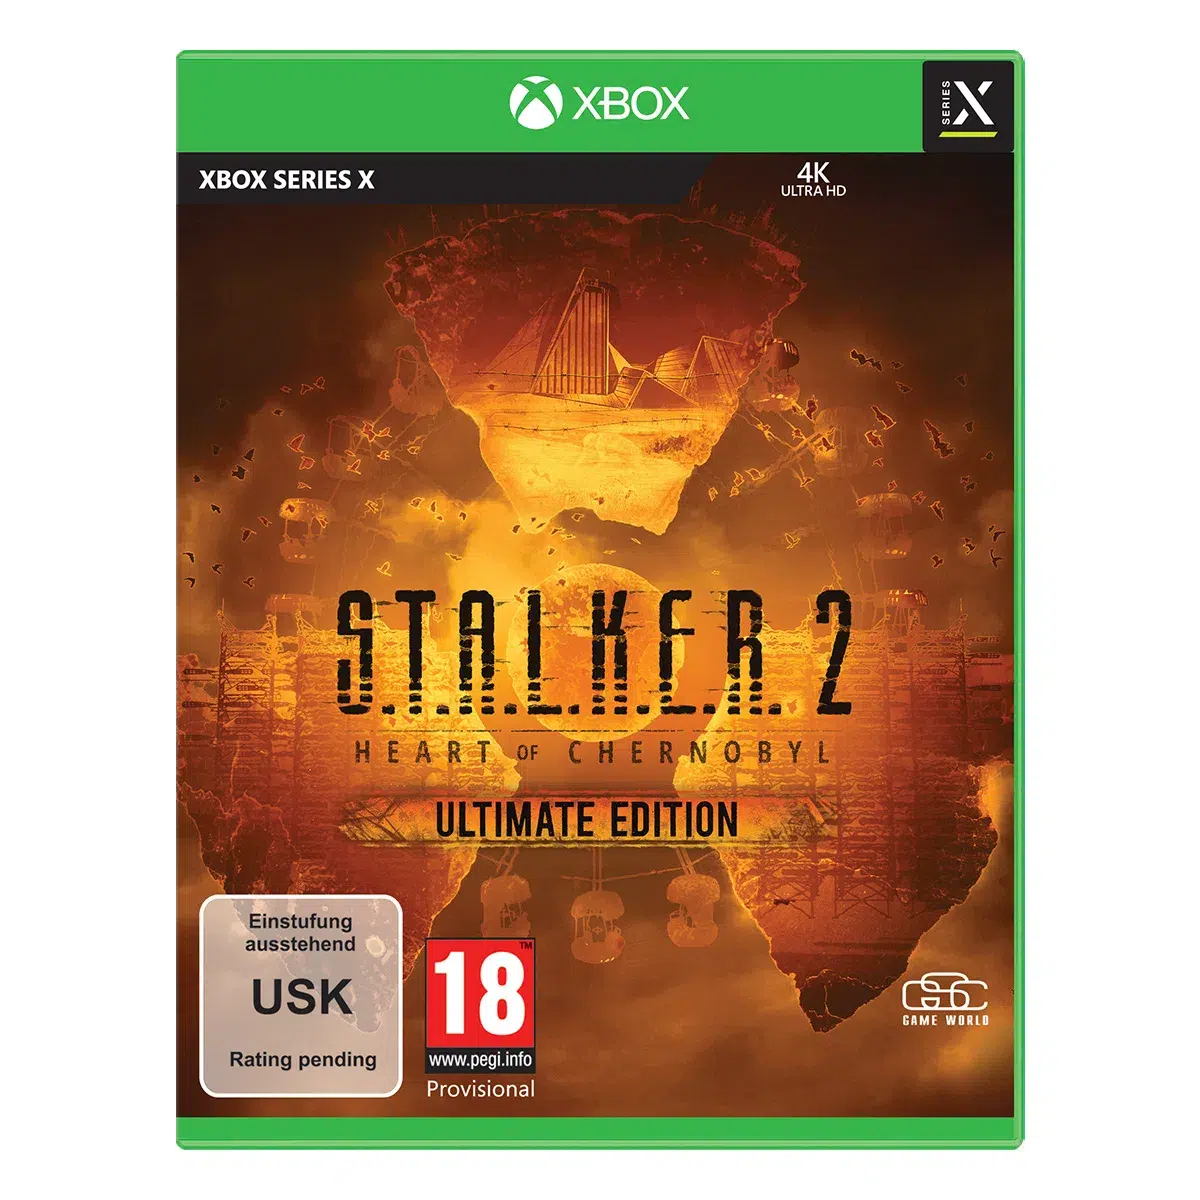 S.T.A.L.K.E.R. 2: Heart of Chornobyl Ultimate Edition (XSRX) (INT)